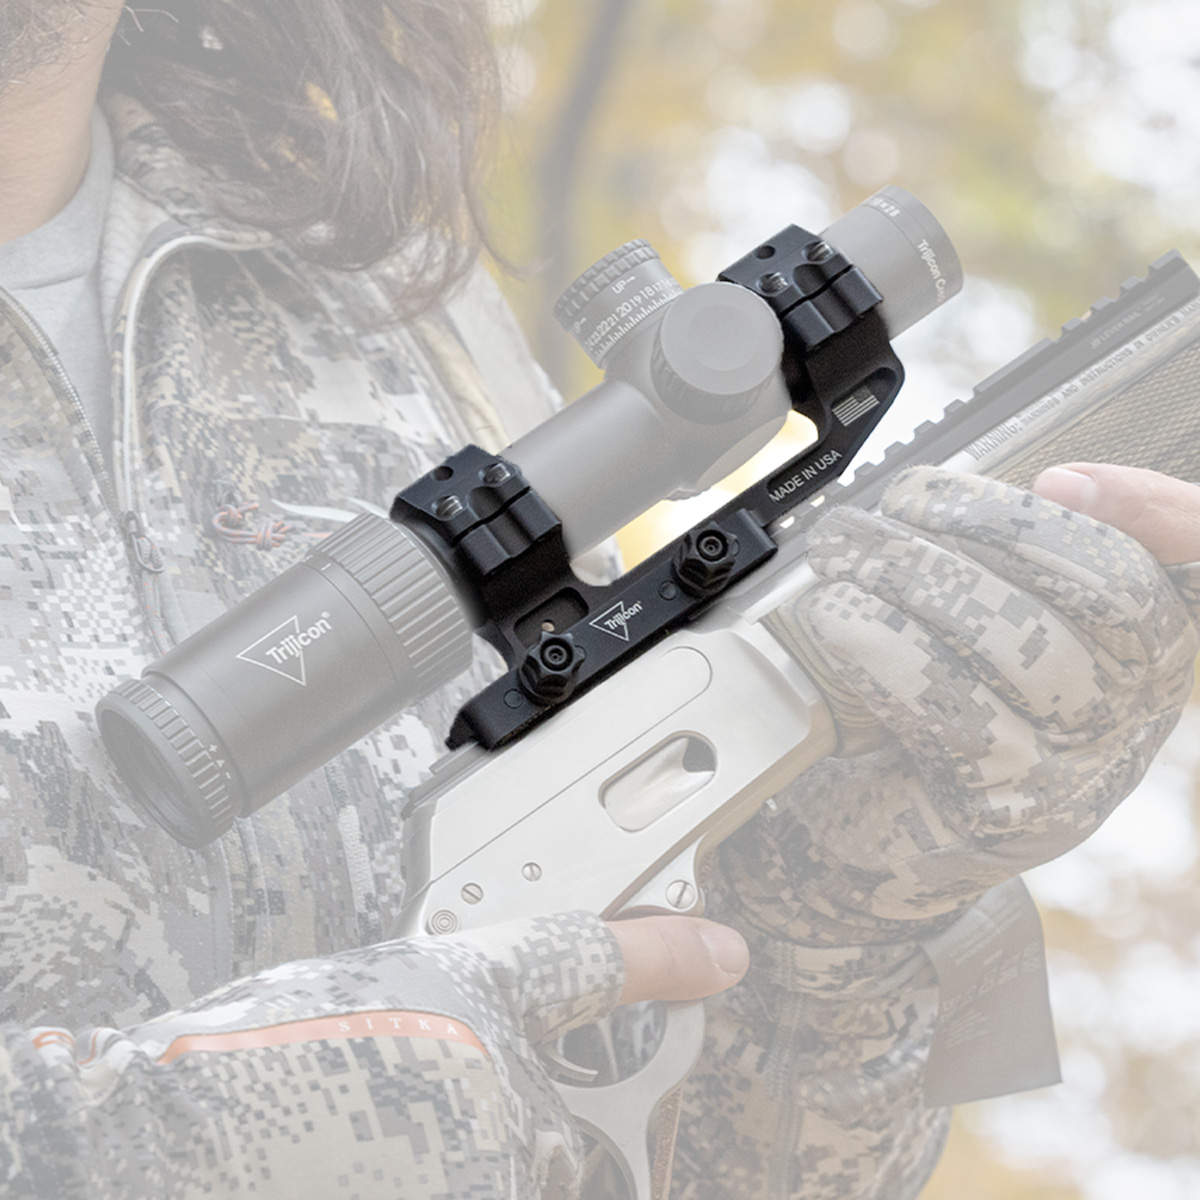 Secure your sight with our expanded line of Trijicon Quick Release Mounts w/ Q-LOC Technology. These mounts allow for effortless removal and reattachment while maintaining zero. #TrijiconHunt #Trijicon #QLOC #ScopeMount